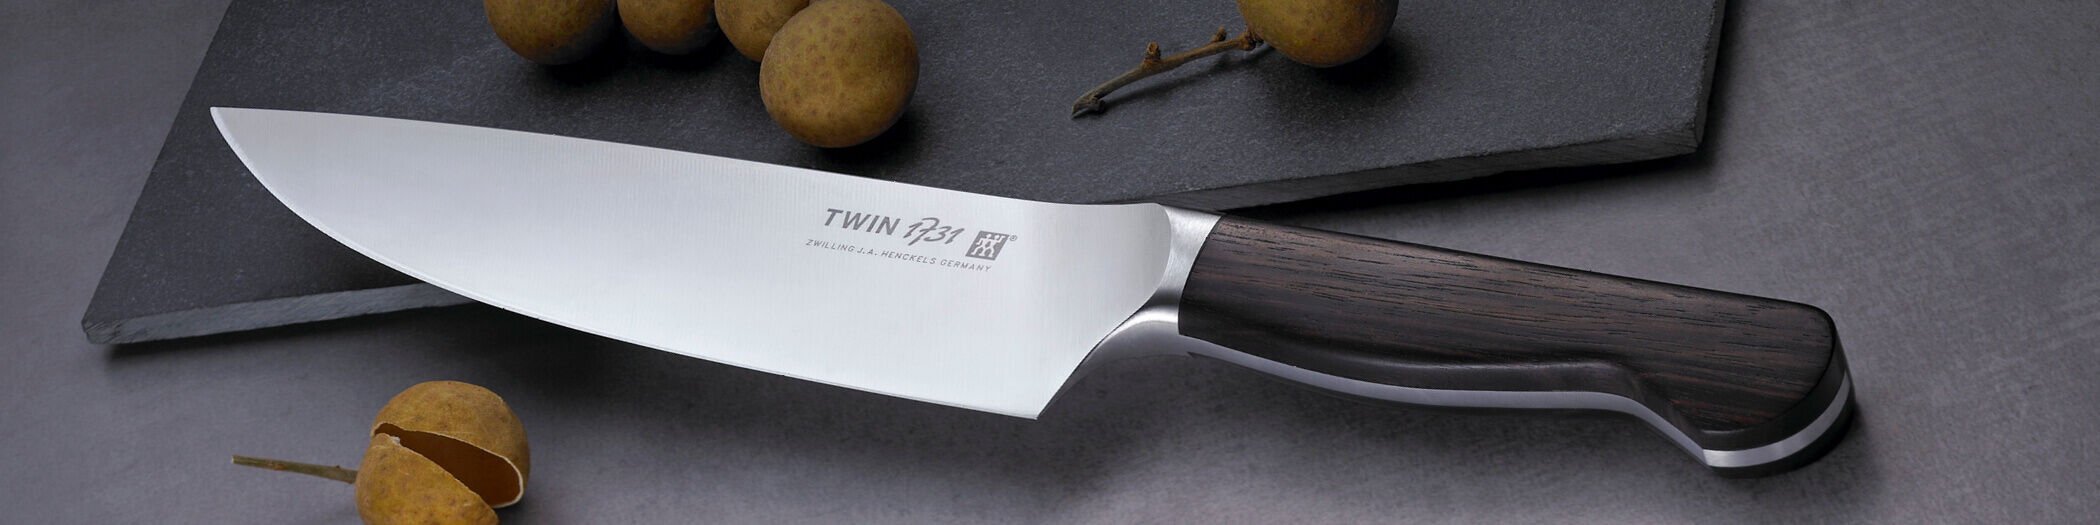 ZWILLING twin 1731 スチール棒-